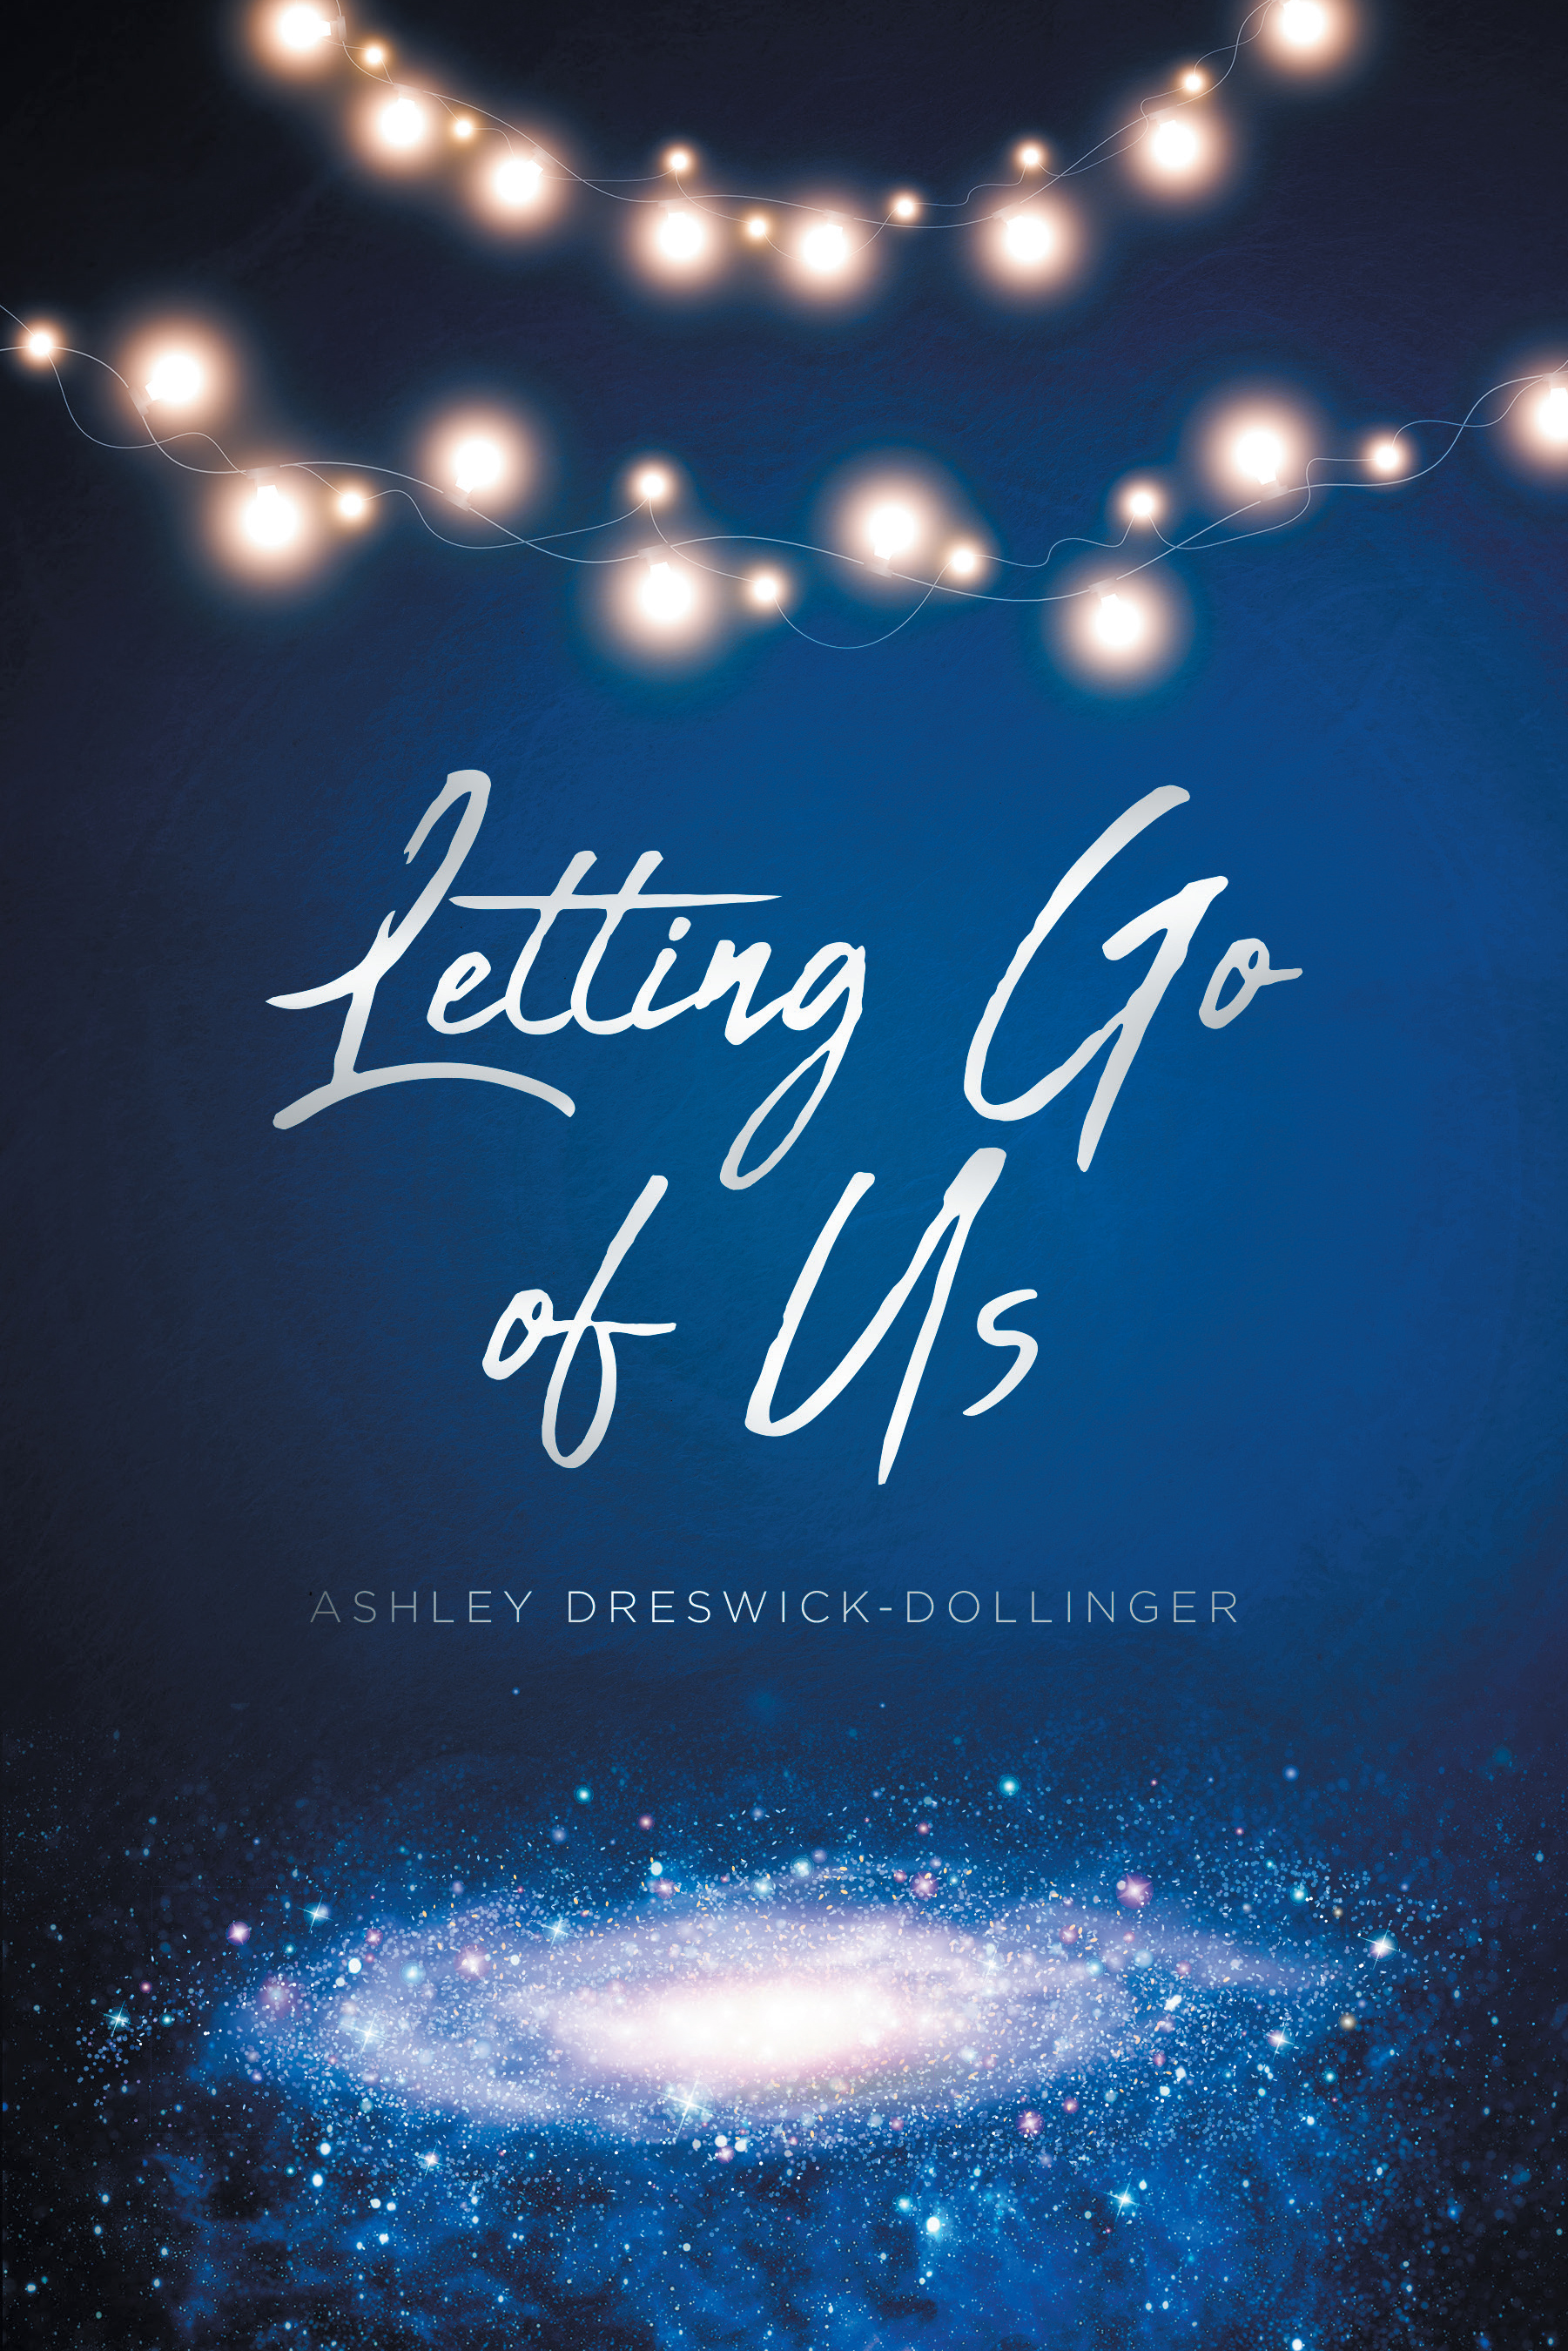 Ashley Dreswick-Dollinger’s New Book, "Letting Go of Us," Follows a Couple Who Must Discern if Their Relationship Can be Saved or if It is Better to Let Each Other Go